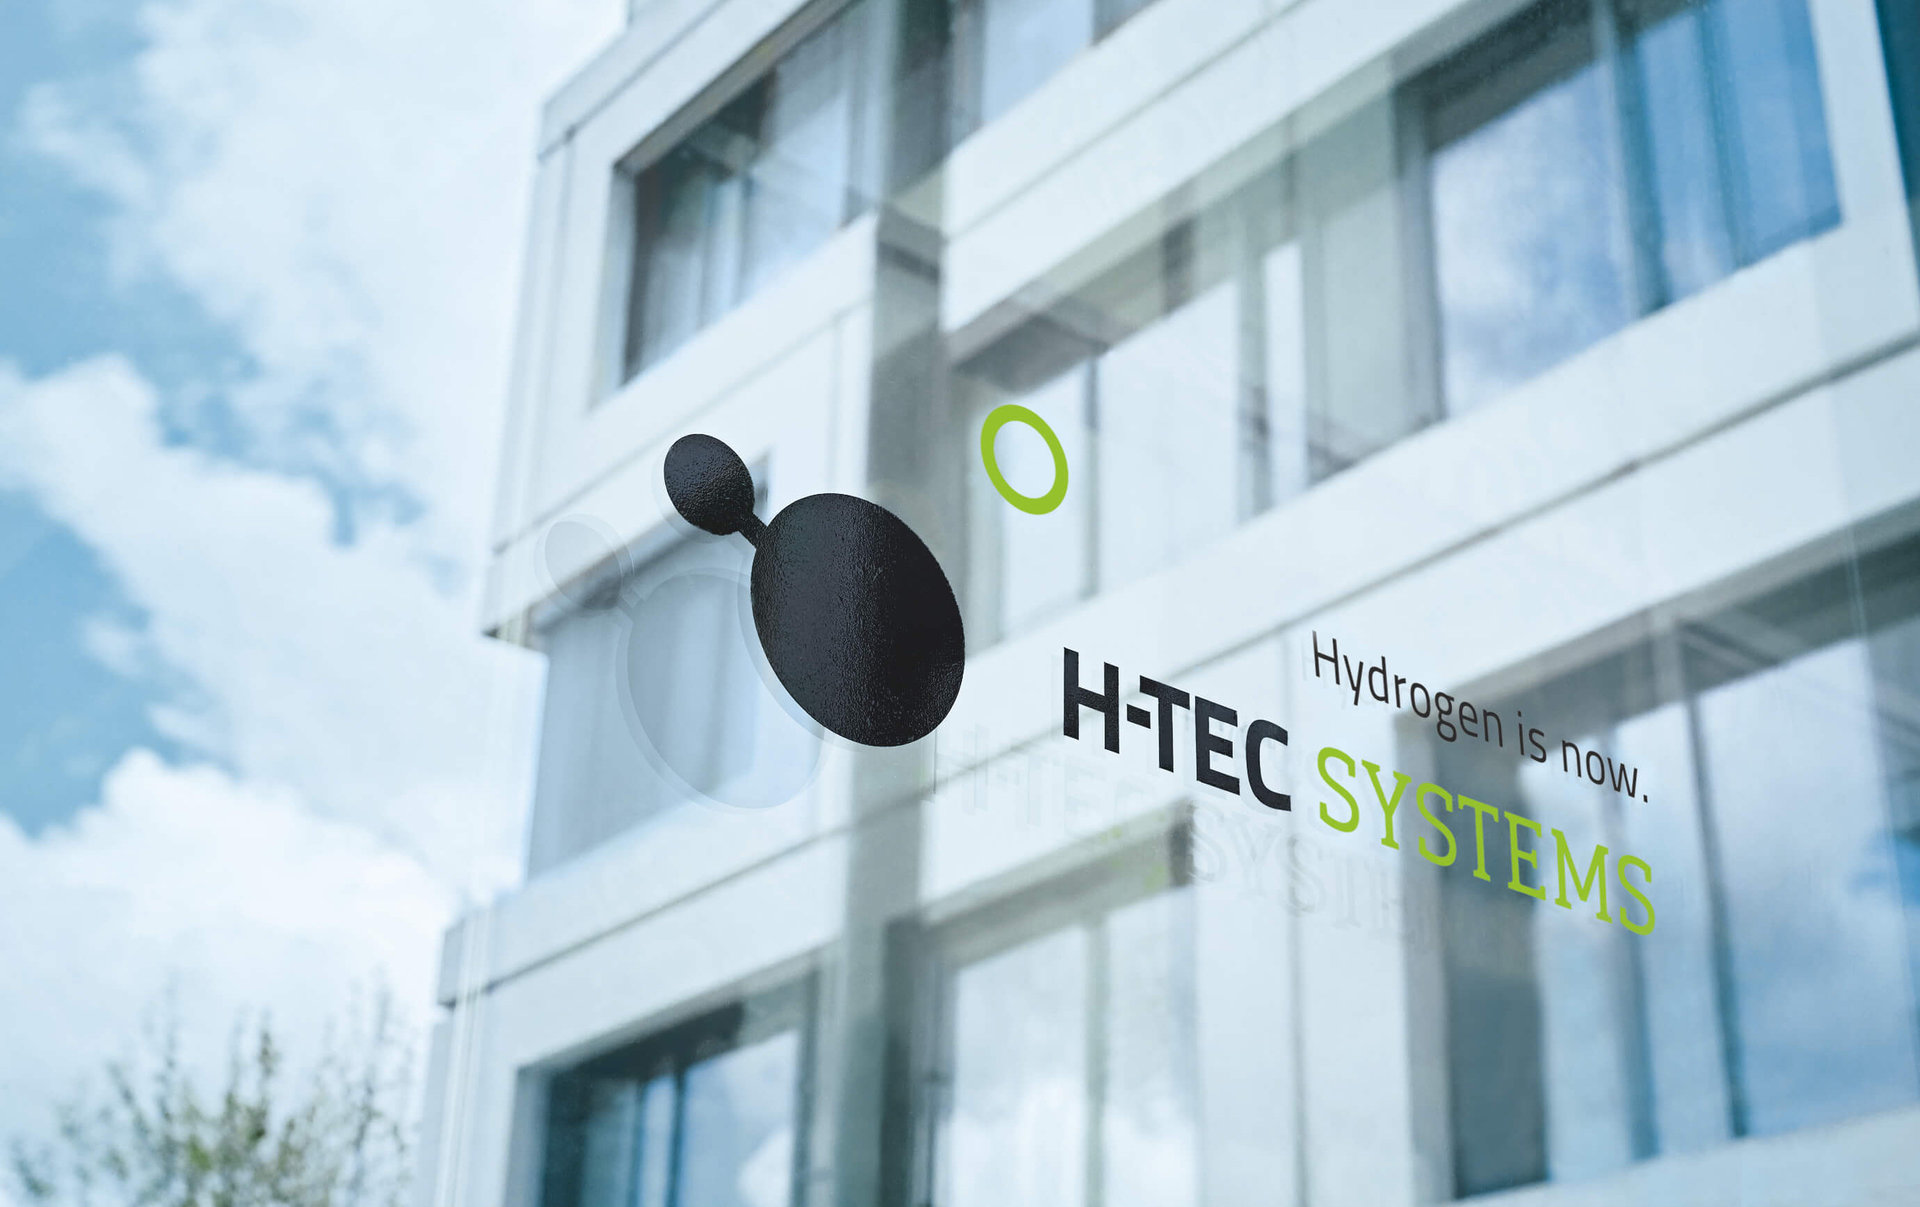 Energy transition with hydrogen: About H-TEC SYSTEMS